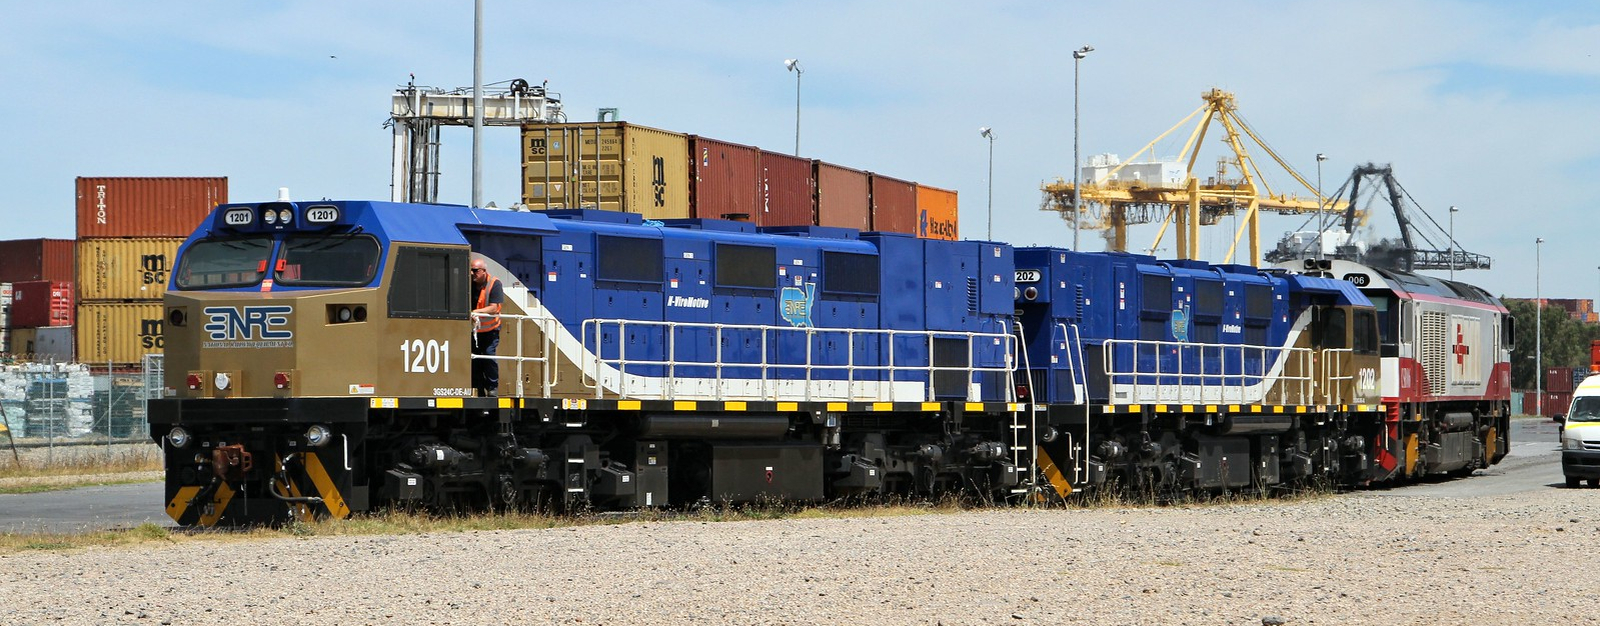 Nos. 1201 and 1202 in November 2014 at Pelican Point, Adelaide